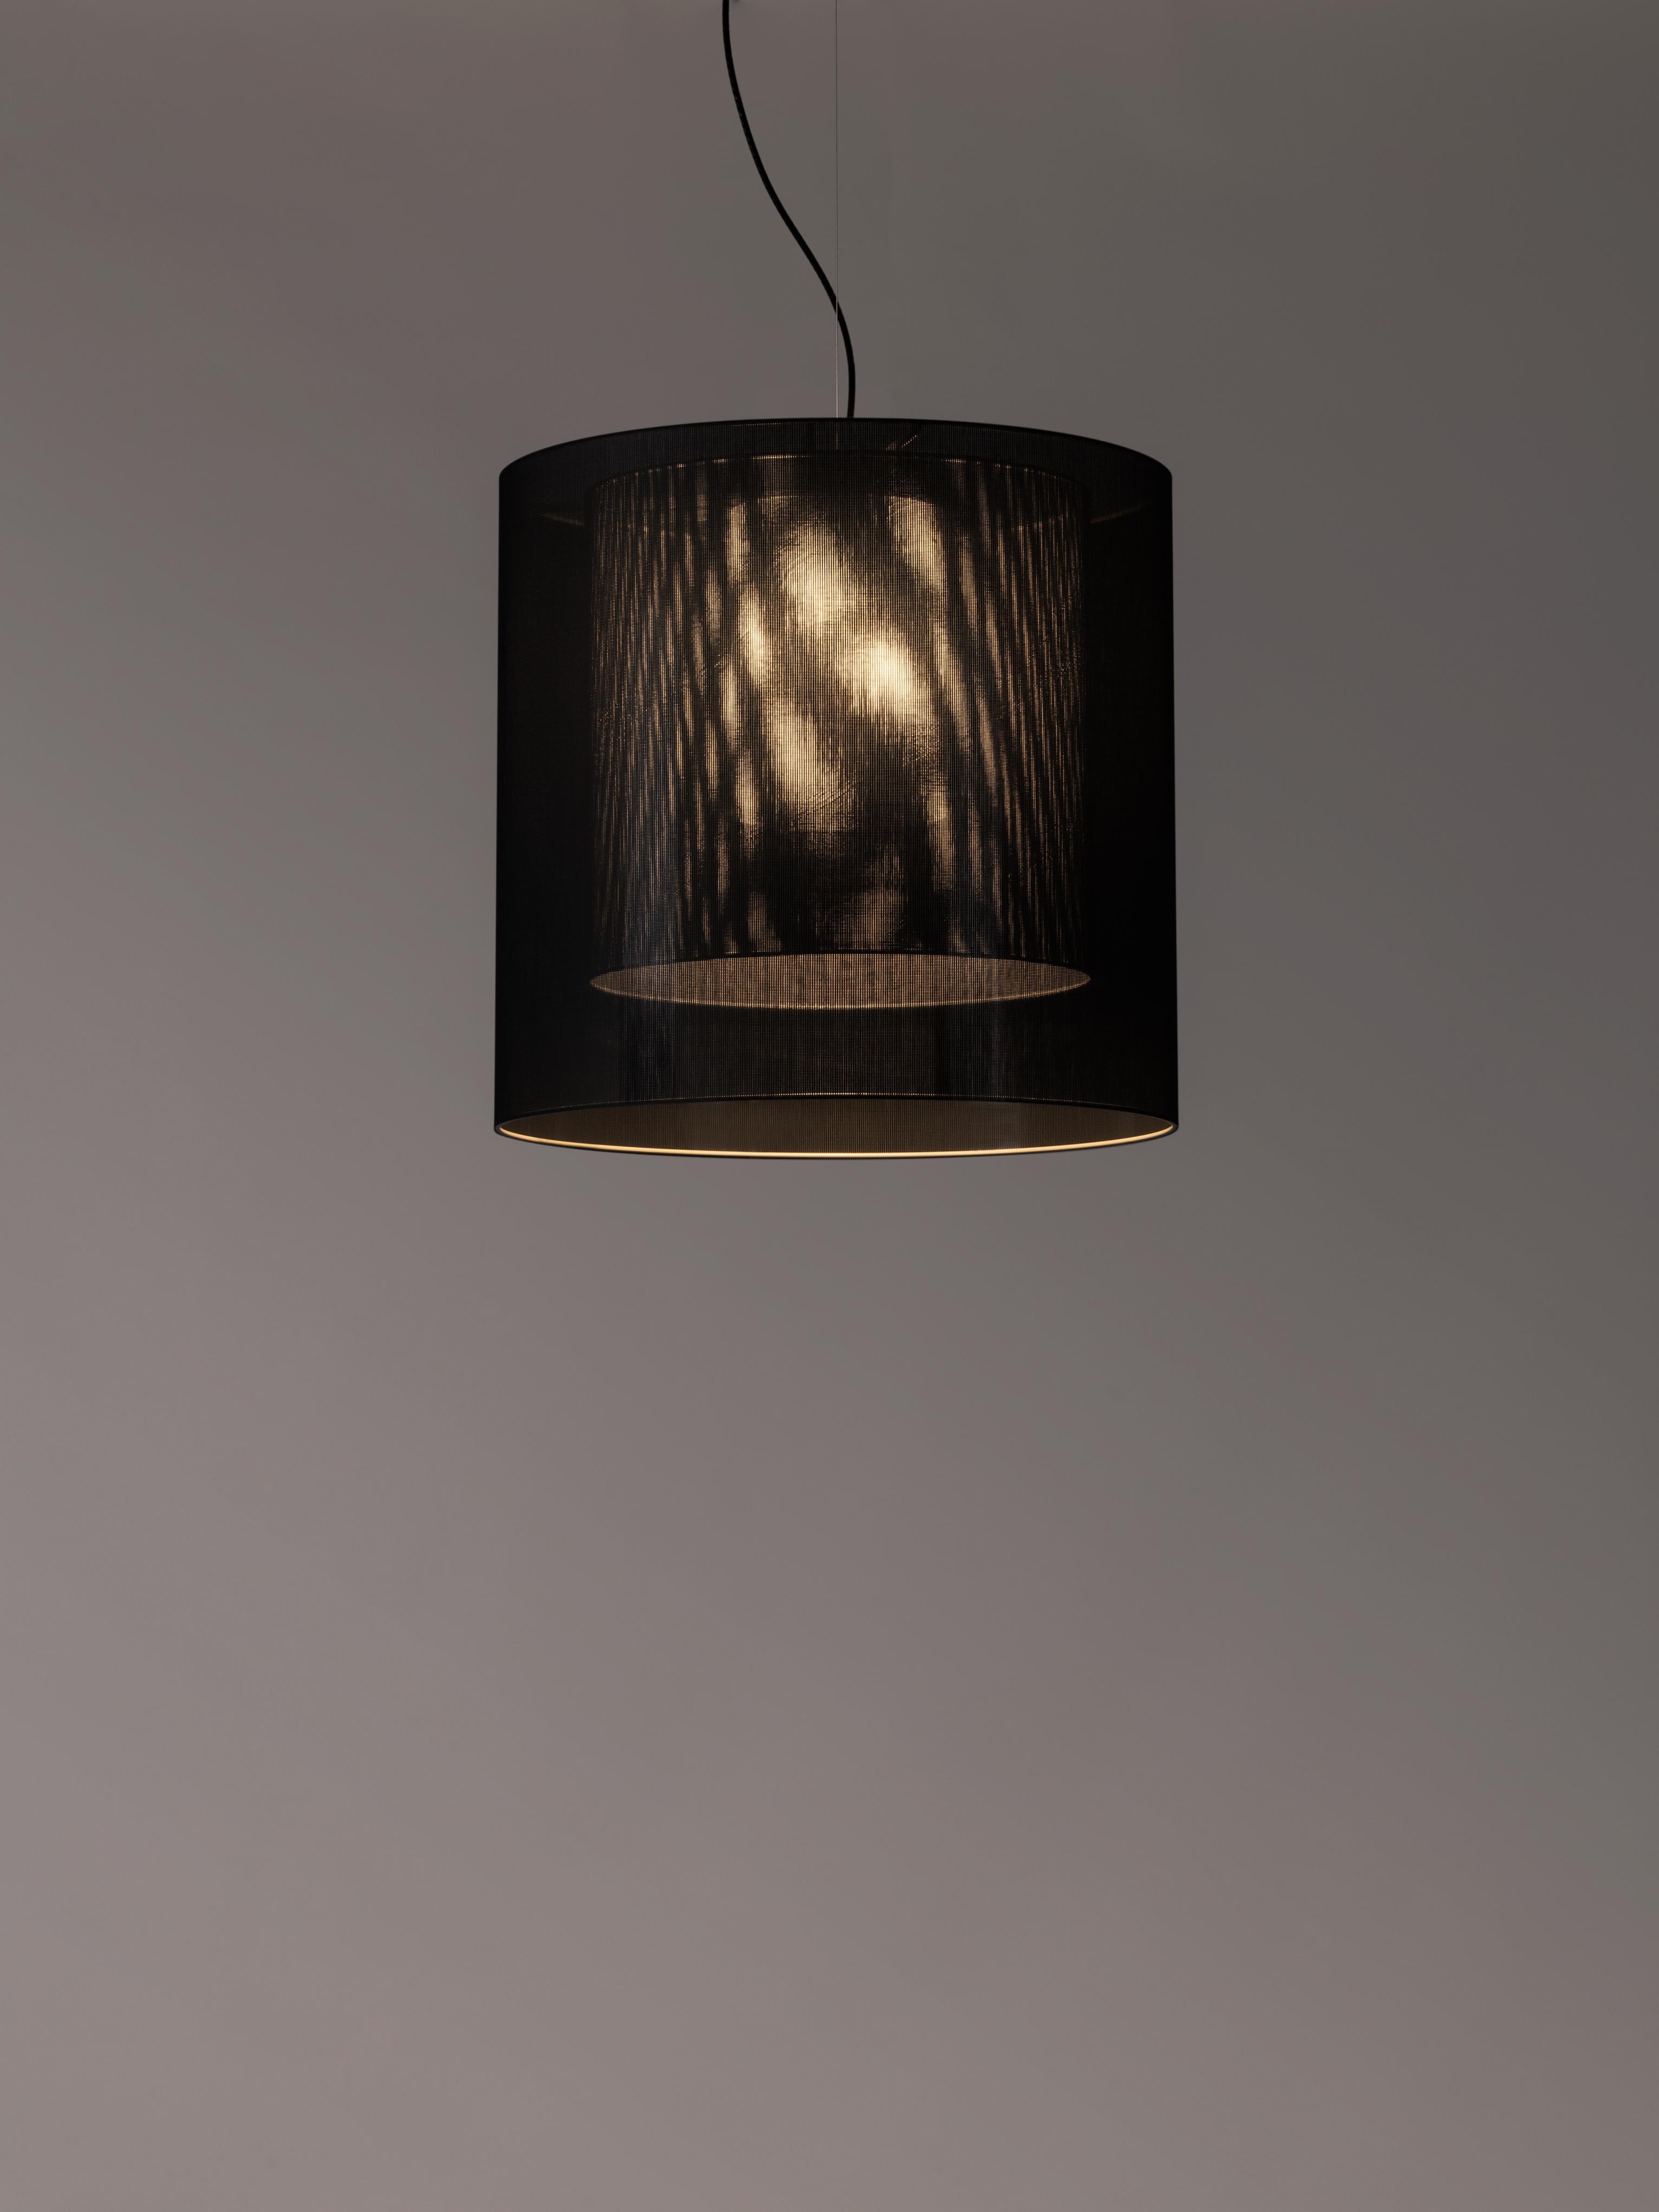 Black and grey moaré LM pendant lamp by Antoni Arola
Dimensions: D 62 x H 60 cm
Materials: Metal, polyester.
Available in other colors and sizes.

Moaré’s multiple combinations of formats and colours make it highly versatile. The series takes